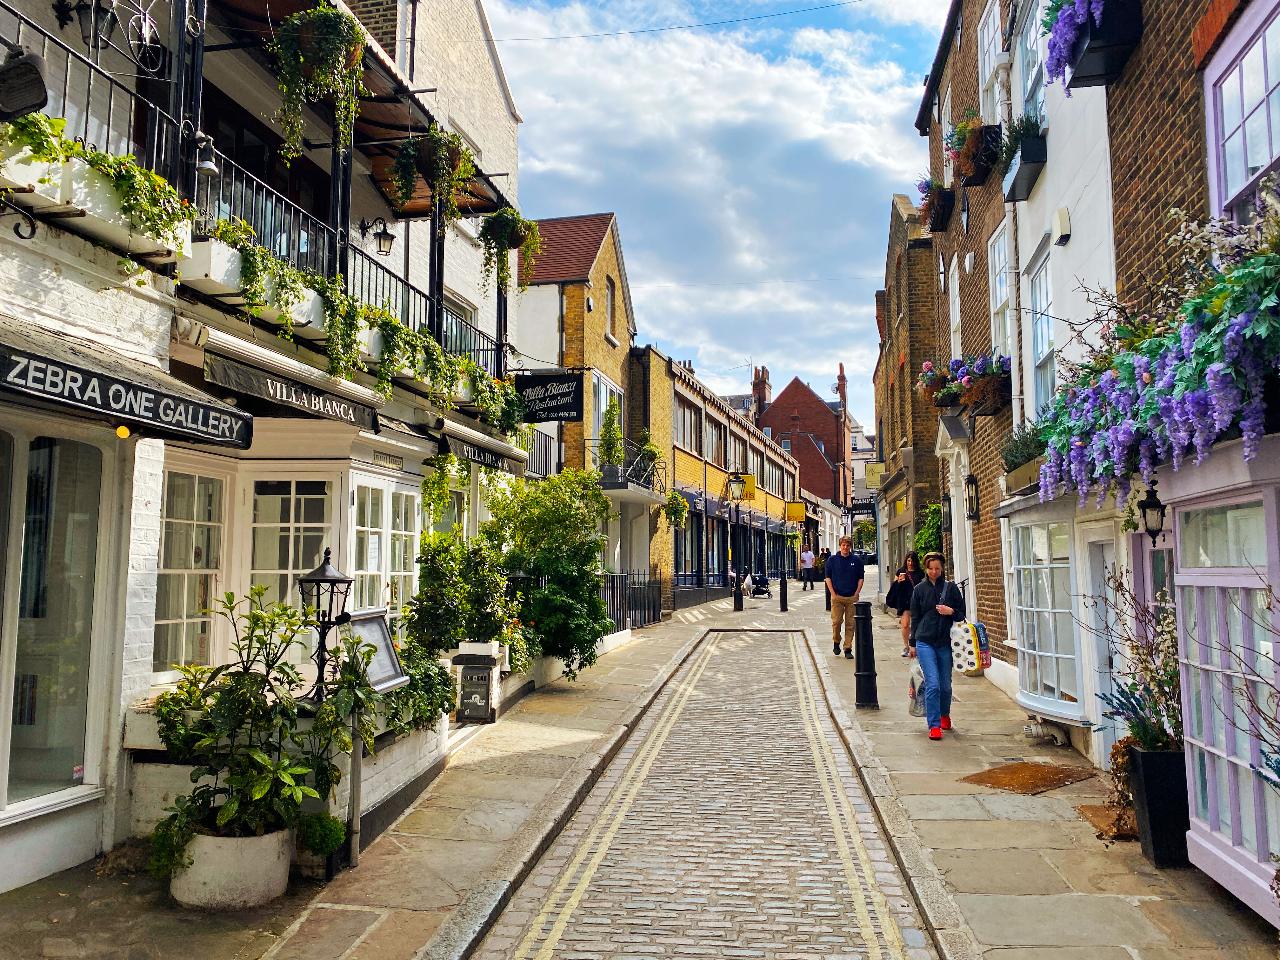  Discovery walk in London’s Hampstead: A Vibrant Village Voyage